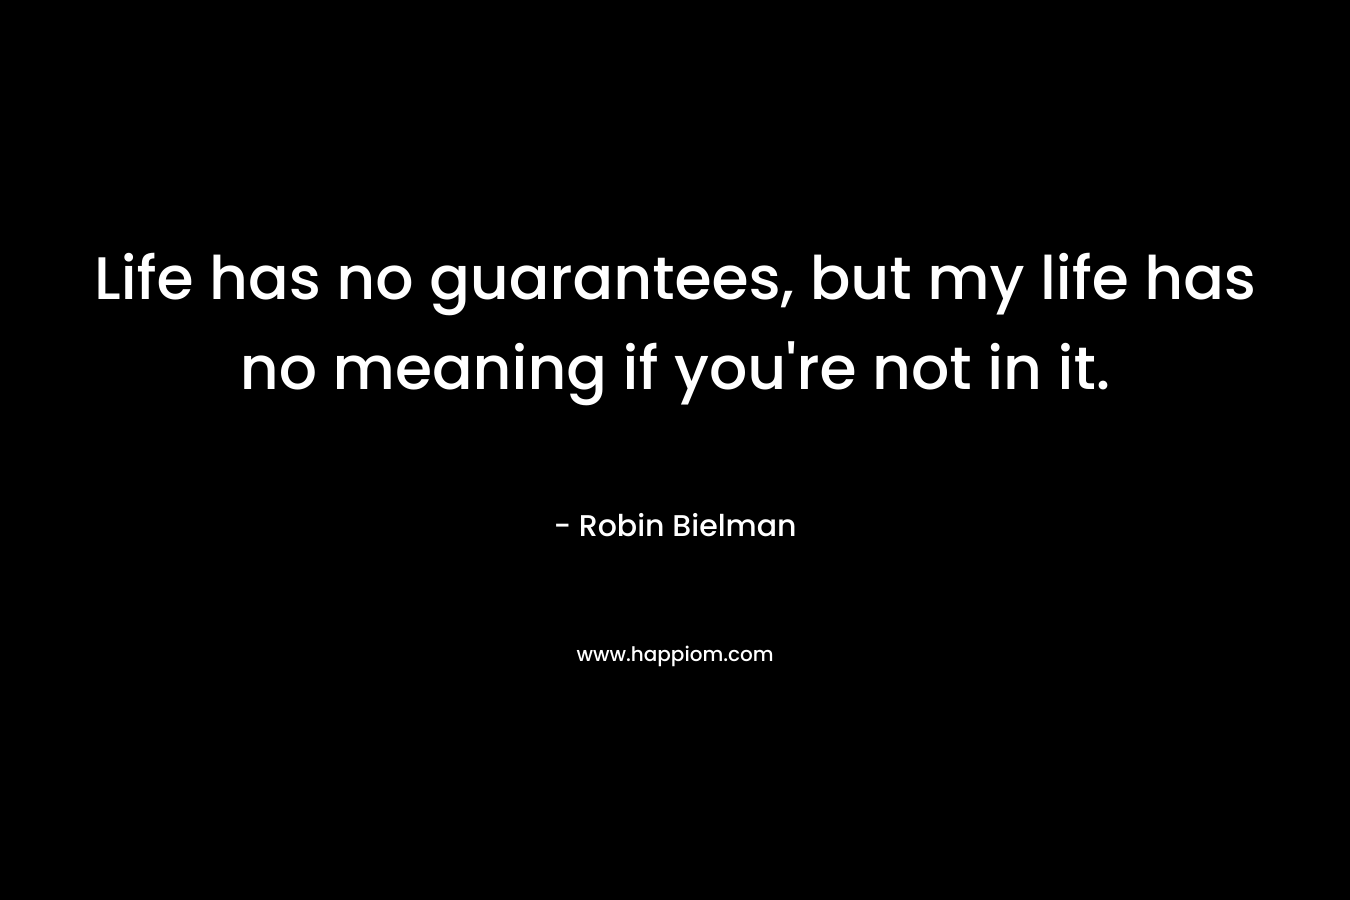 Life has no guarantees, but my life has no meaning if you’re not in it. – Robin Bielman